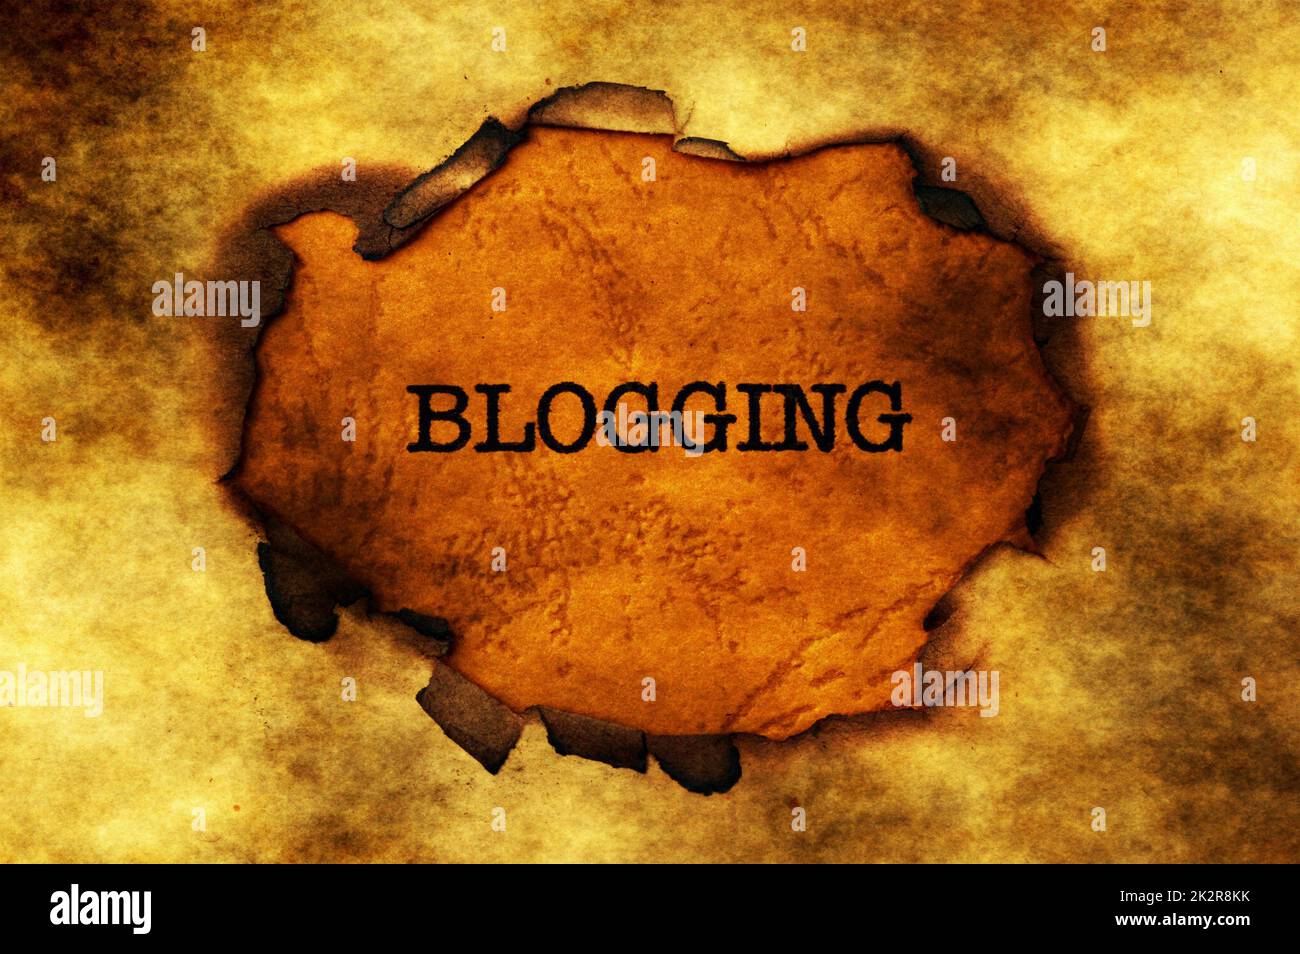 Blogging text on paper hole Stock Photo